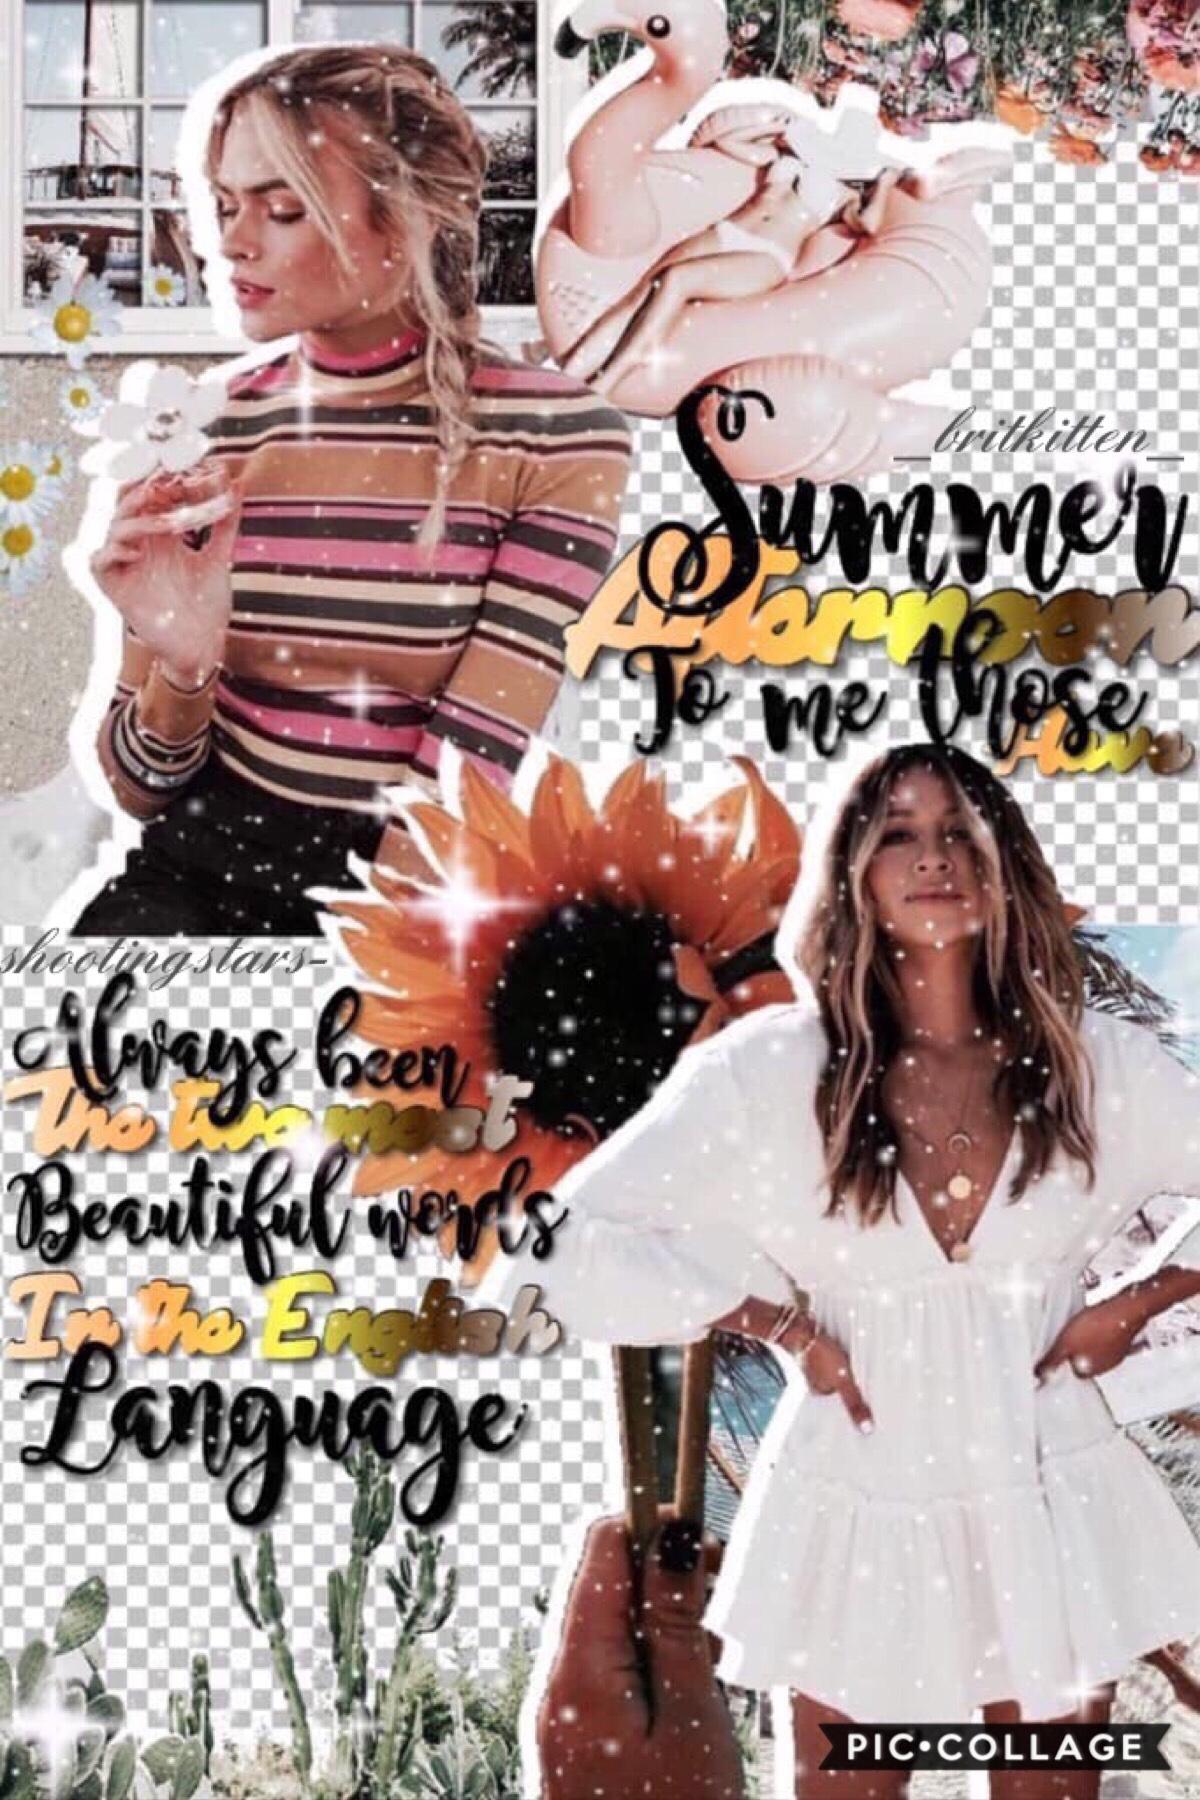 collab with the awesome brit!!🌸💓@ssummerlightss lysm gurl🍯💫sry for not posting in a week or being inactive, I went camping for 3 days🌻☀️does anyone wanna collab?🌿🌼